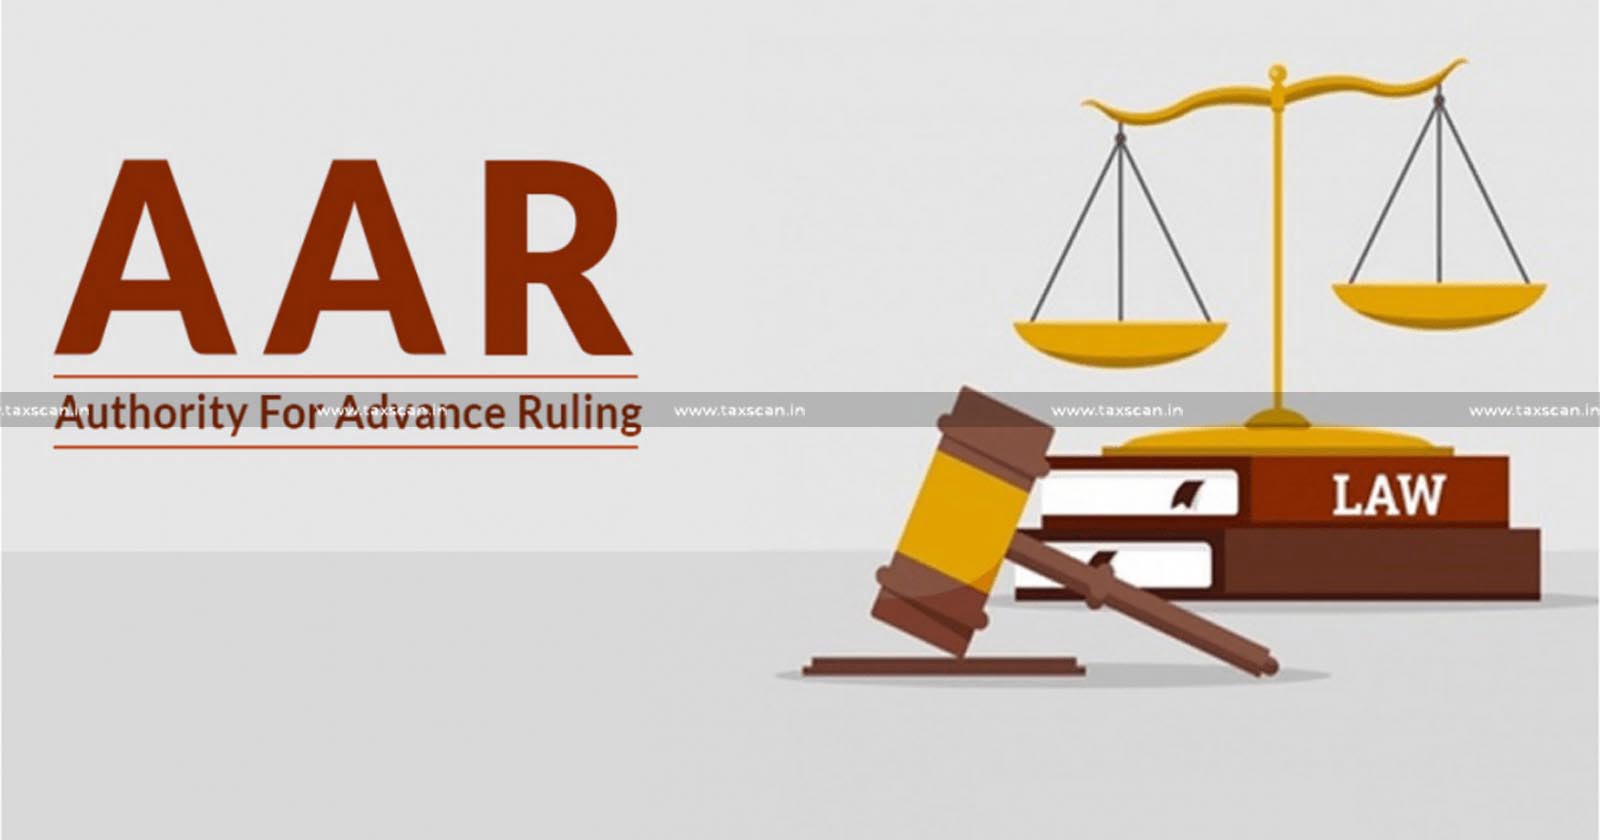 AAR - Authority for Advance Ruling - AAR west bengal - TAXSCAN